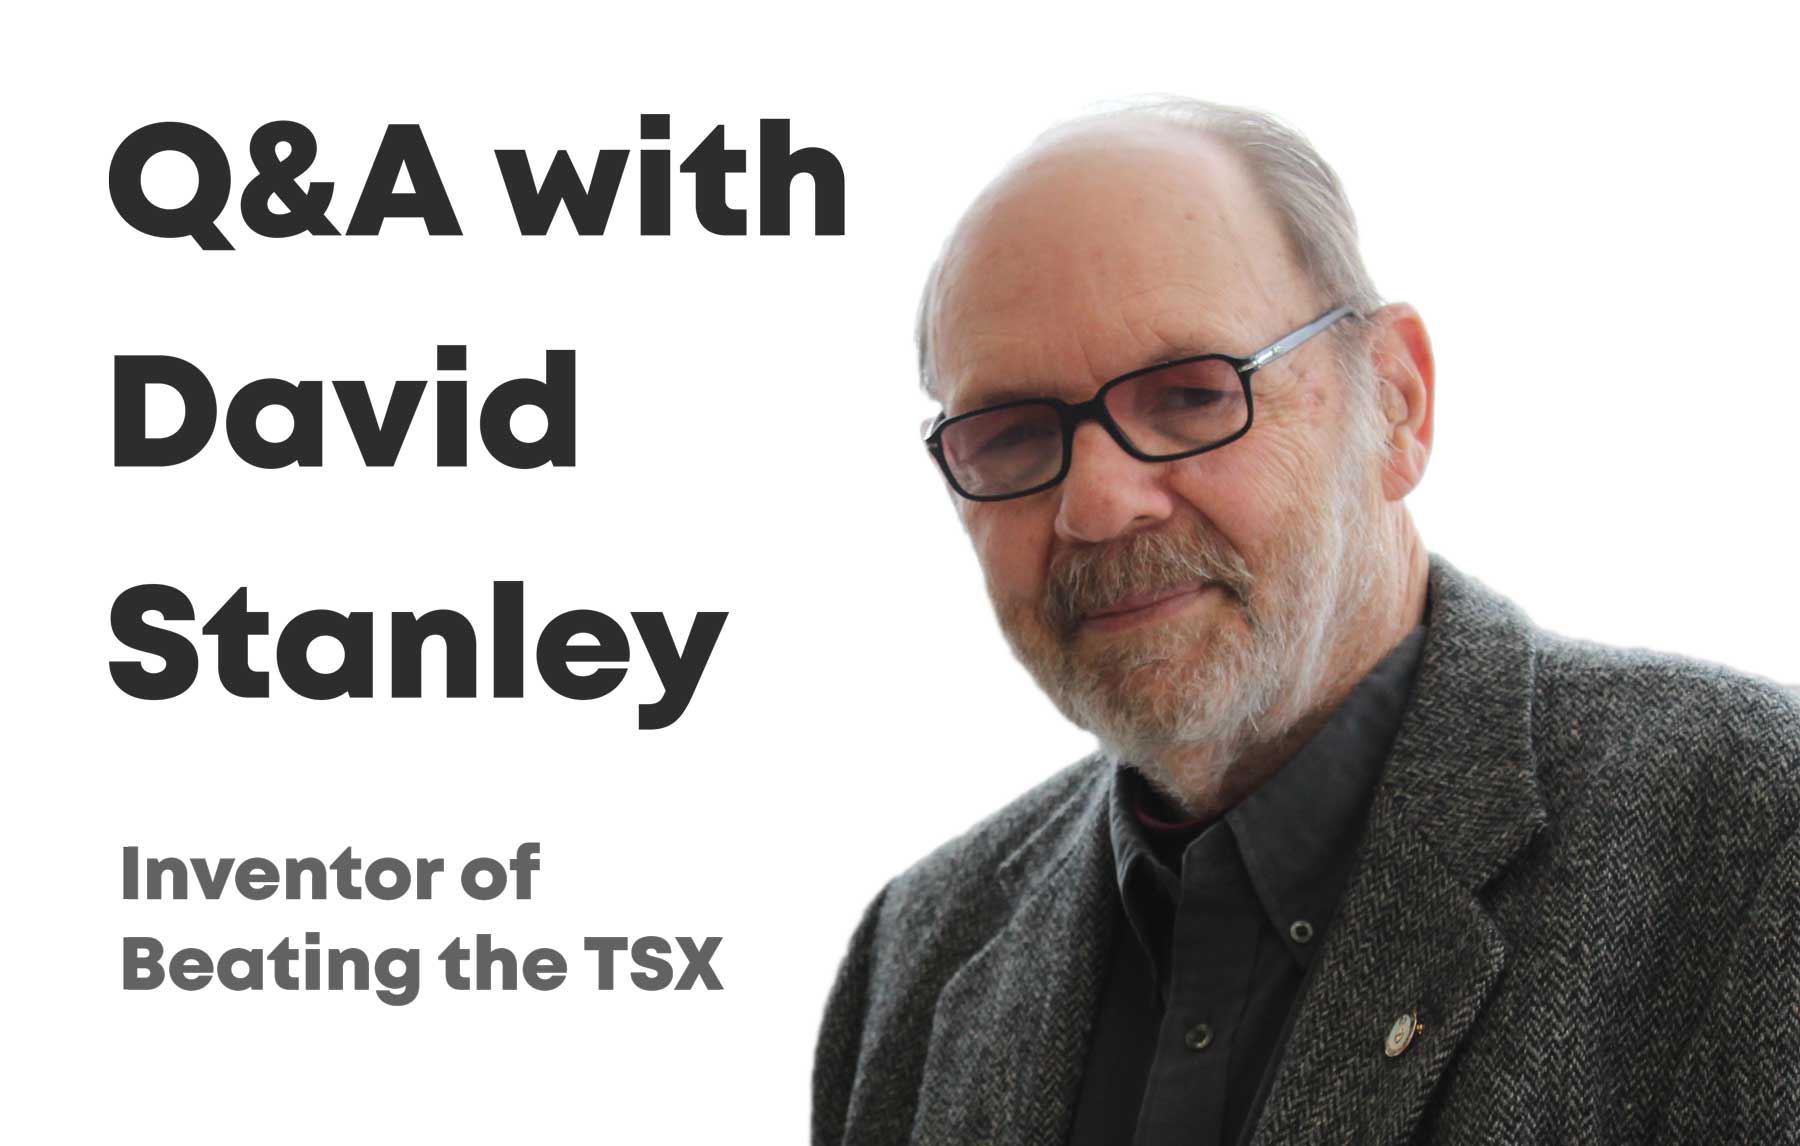 You are currently viewing An interview with the creator of Beating the TSX, David Stanley